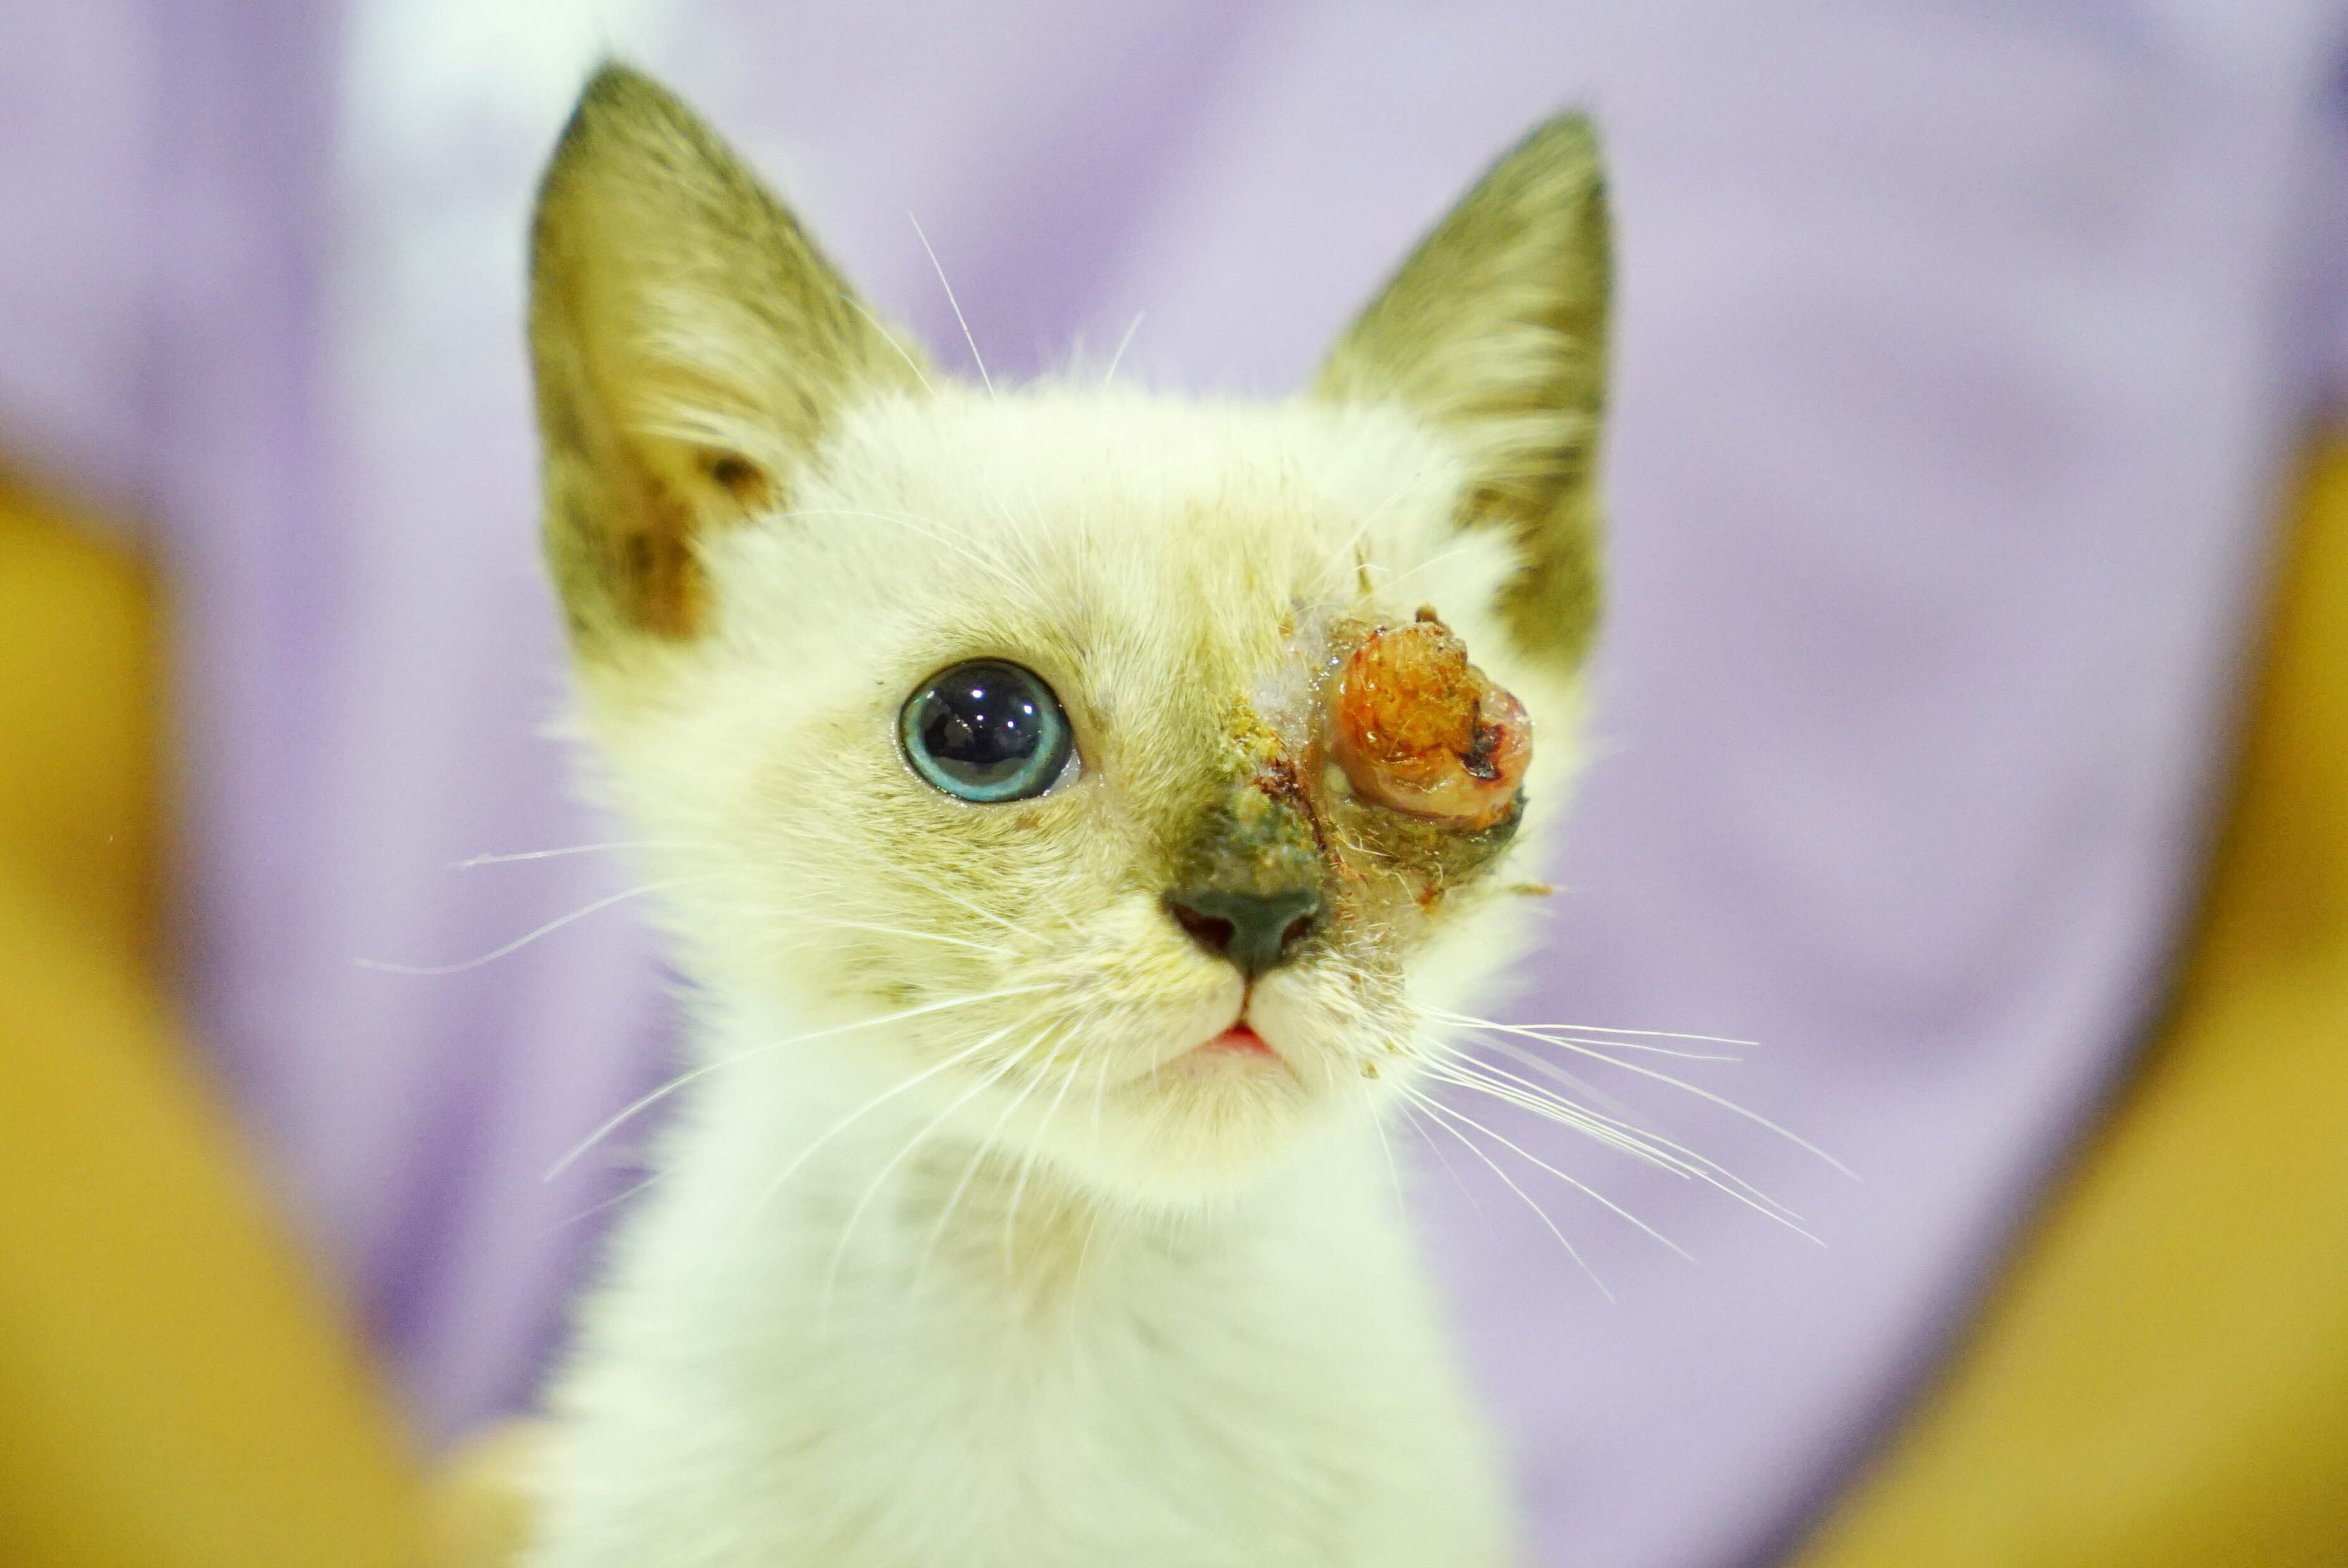 This is what happens when you throw a stone at a little cat´s face ...